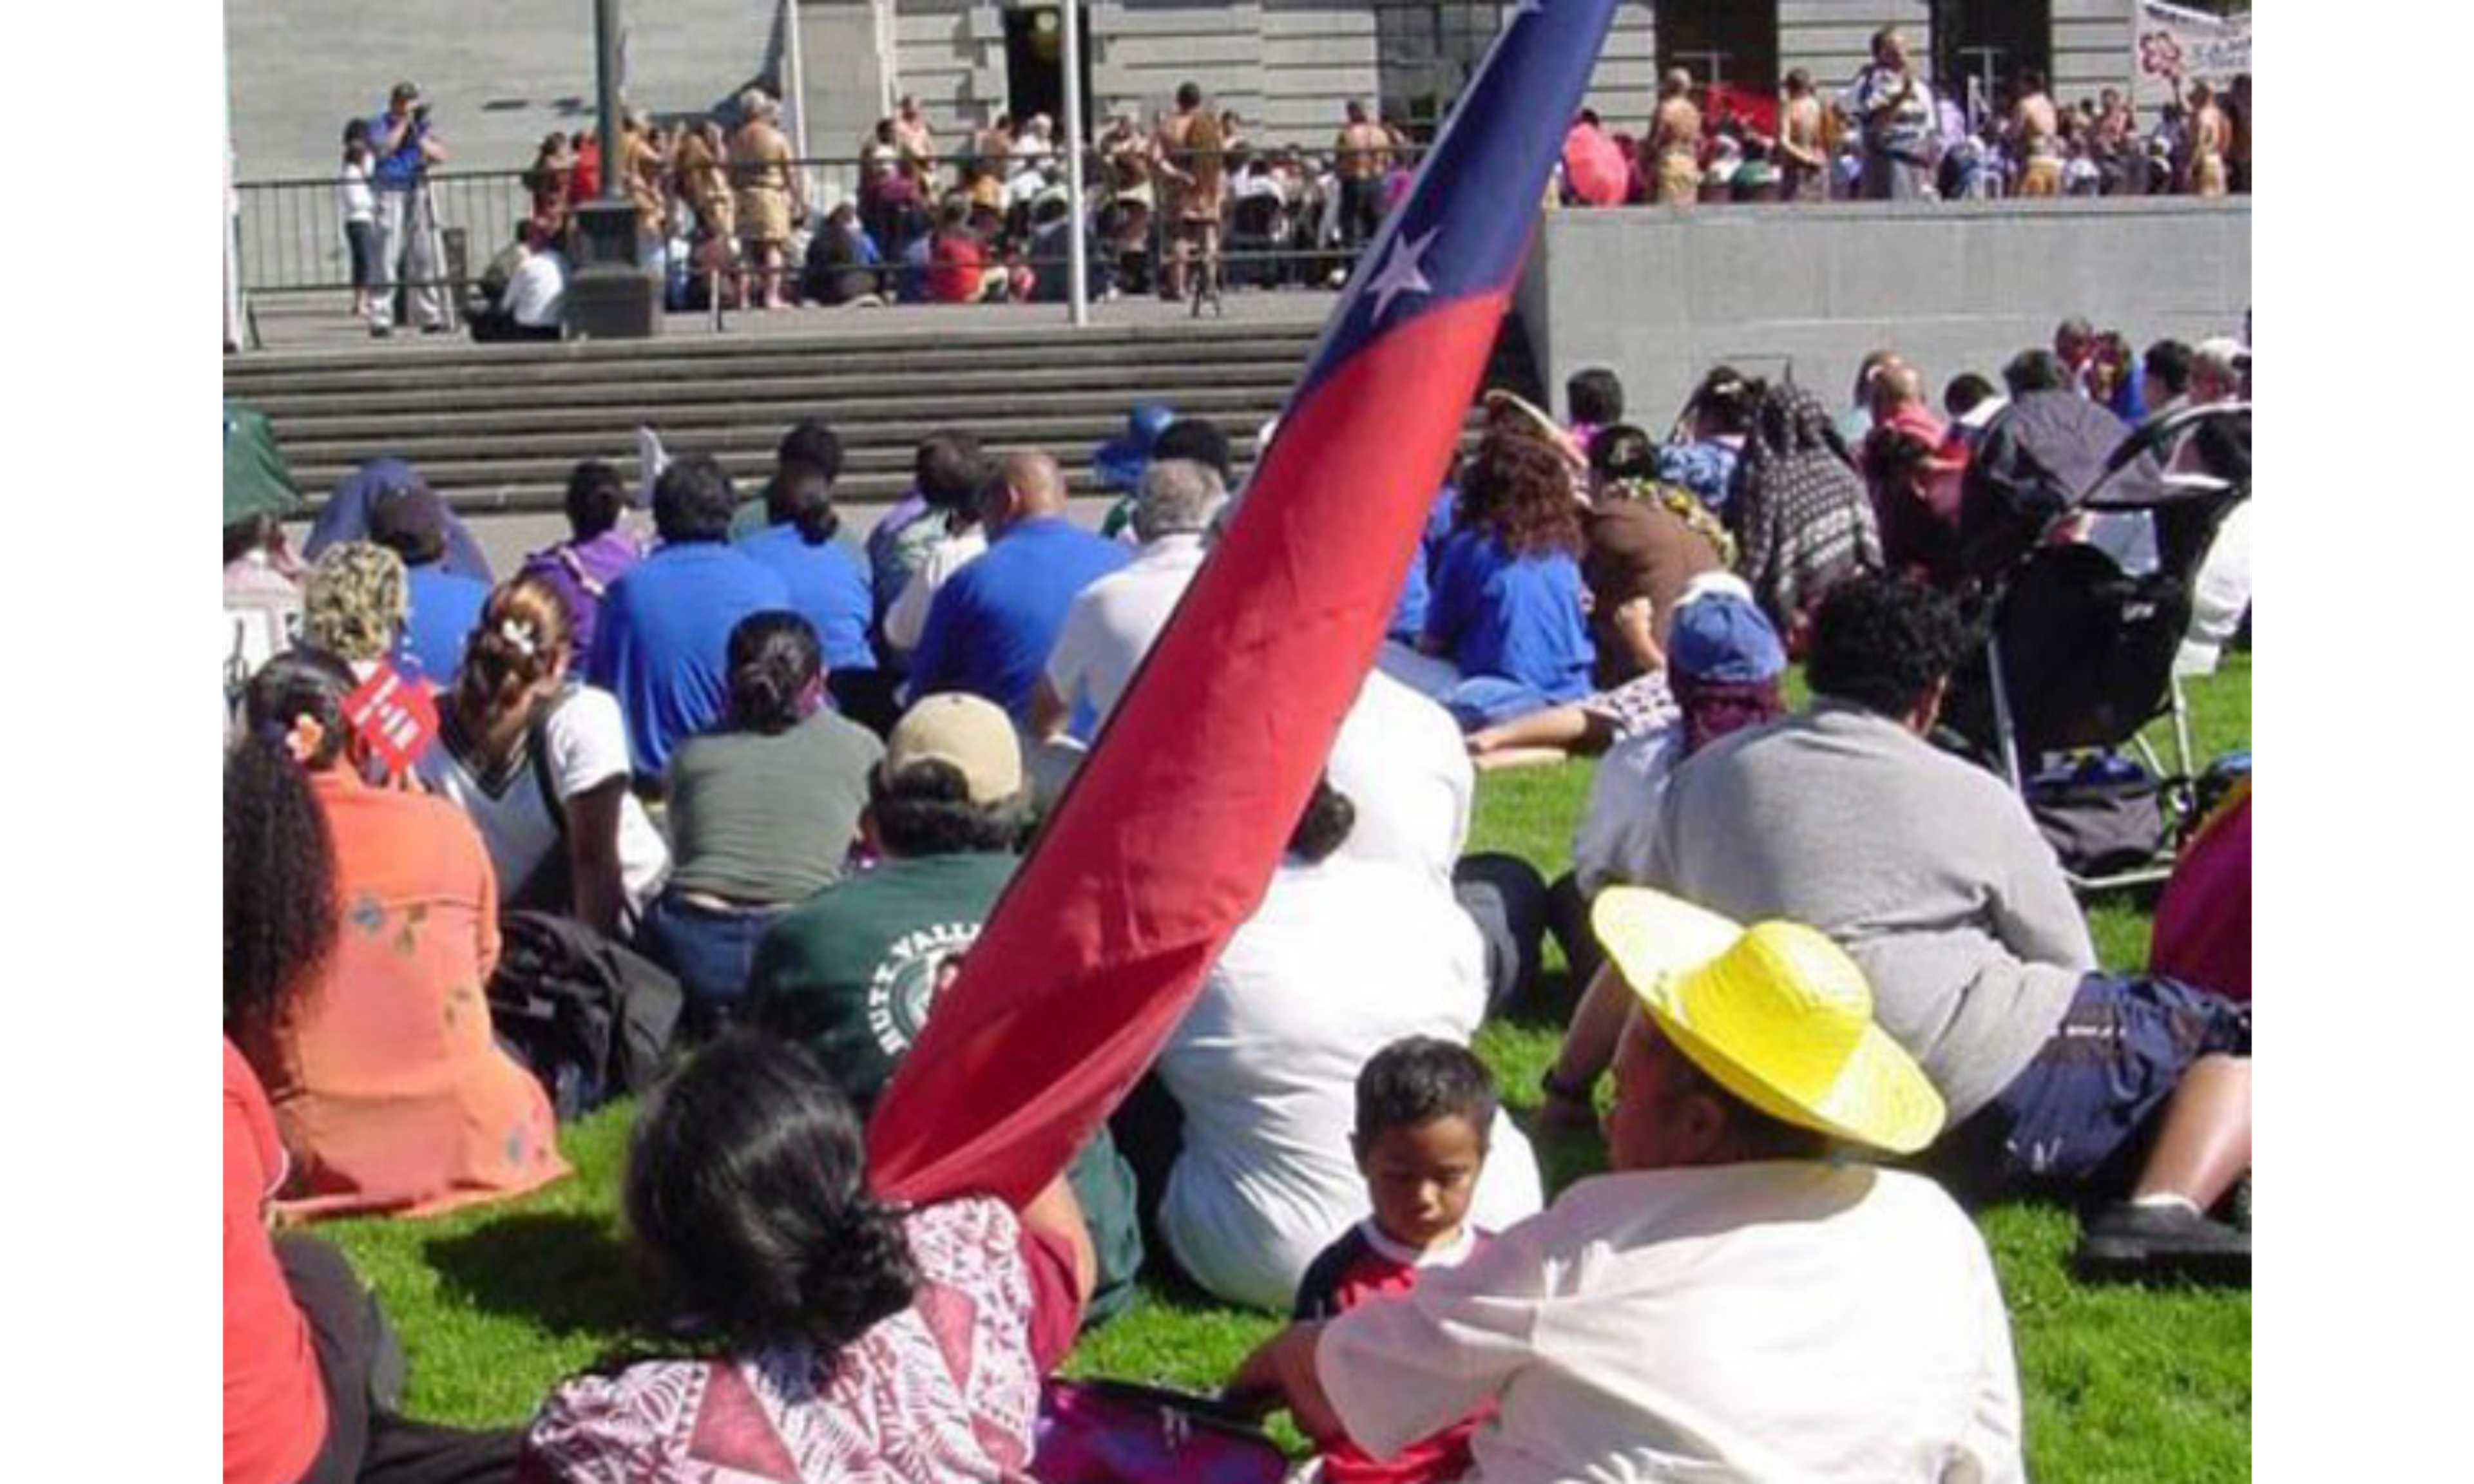 On the steps of Parliament in 2003, thousands of Samoan people deliver a petition with 90,000 signatures against the Citizenship (Western Samoa) Act 1982.